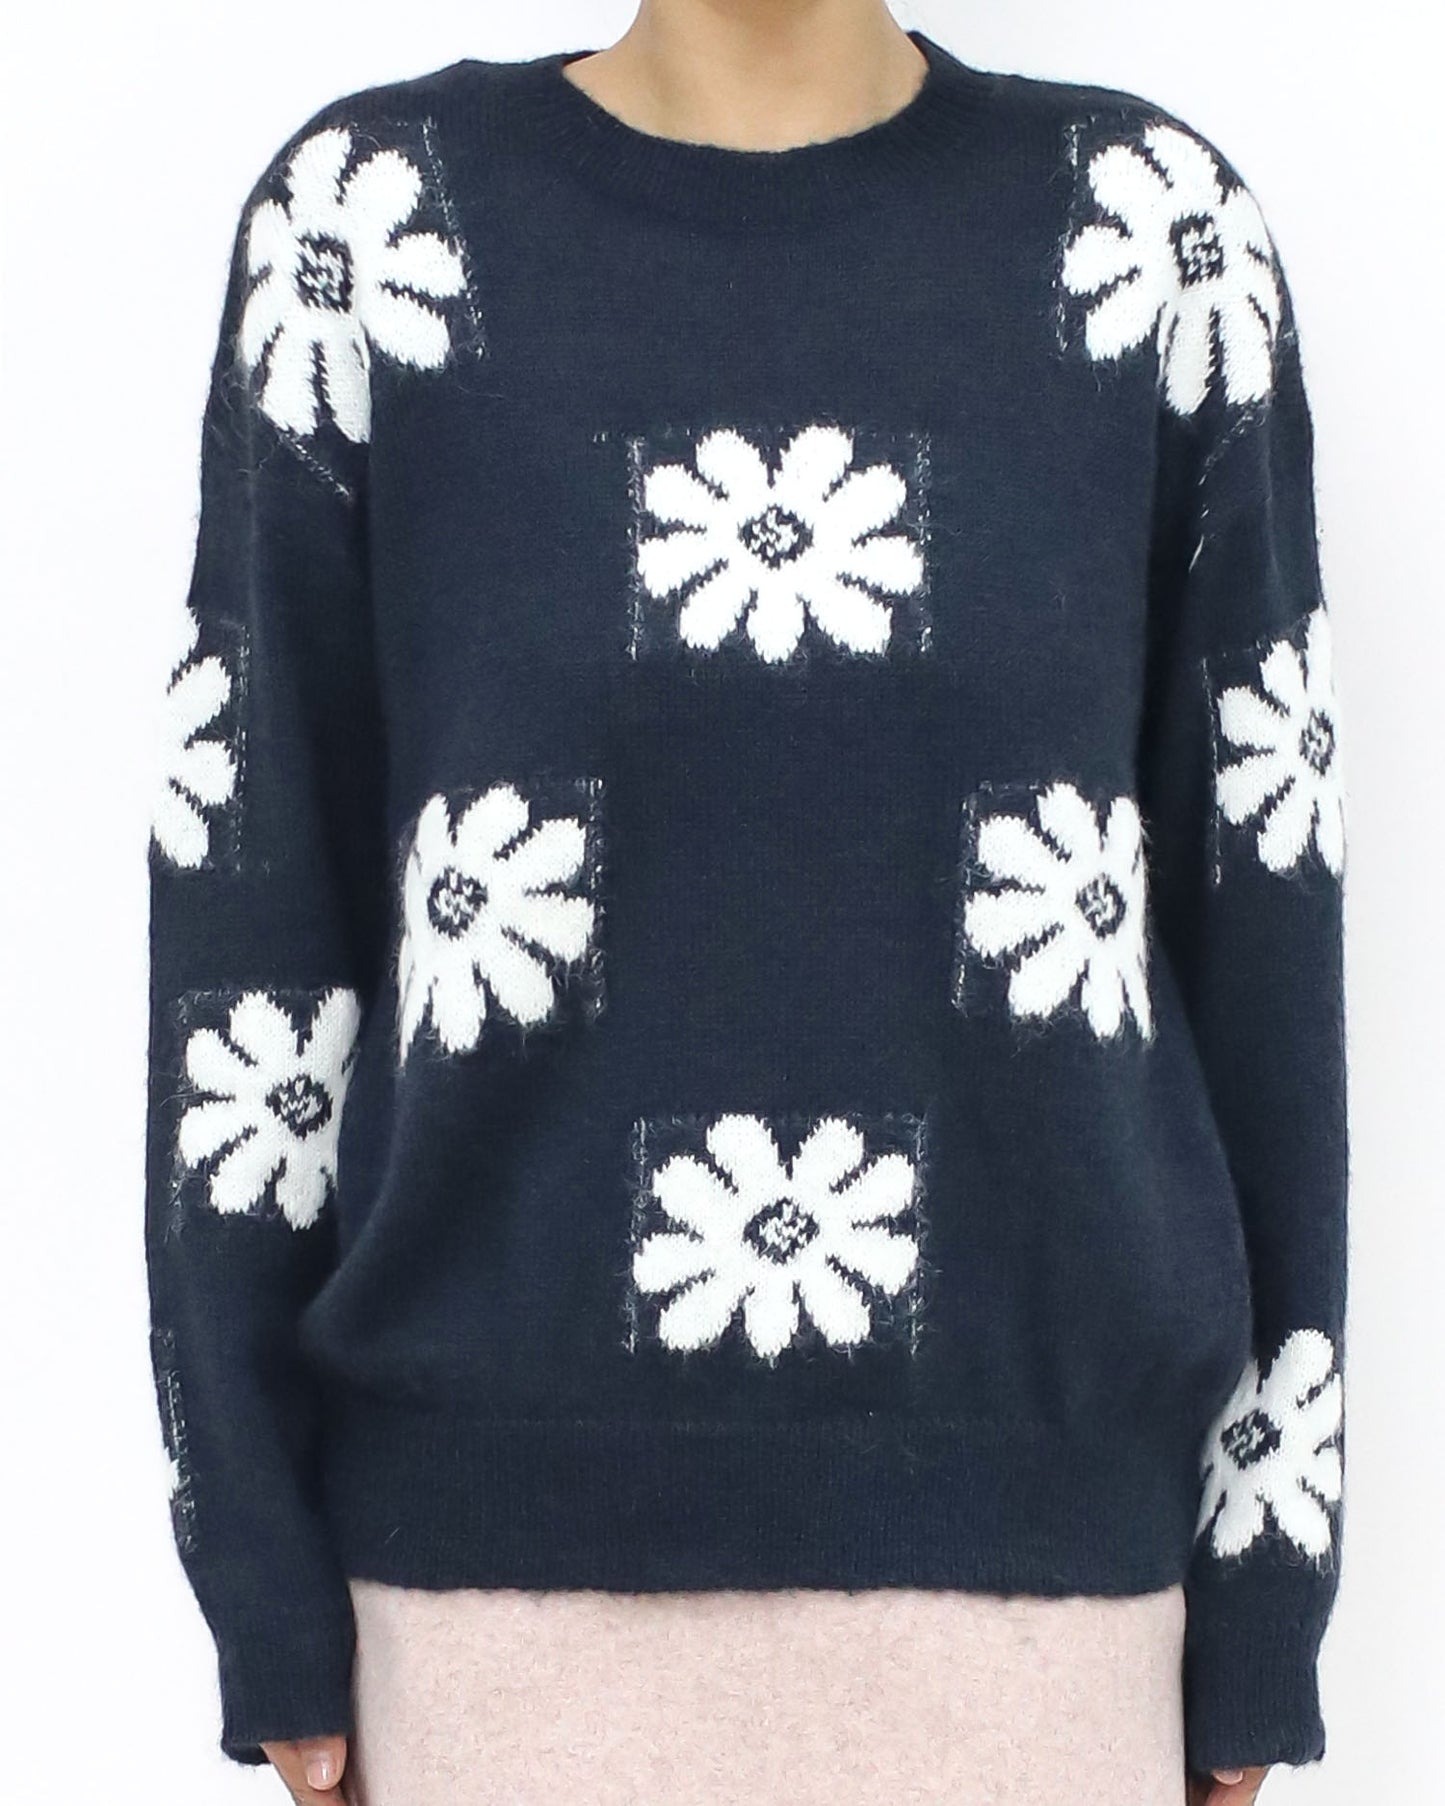 navy & ivory flowers knitted top